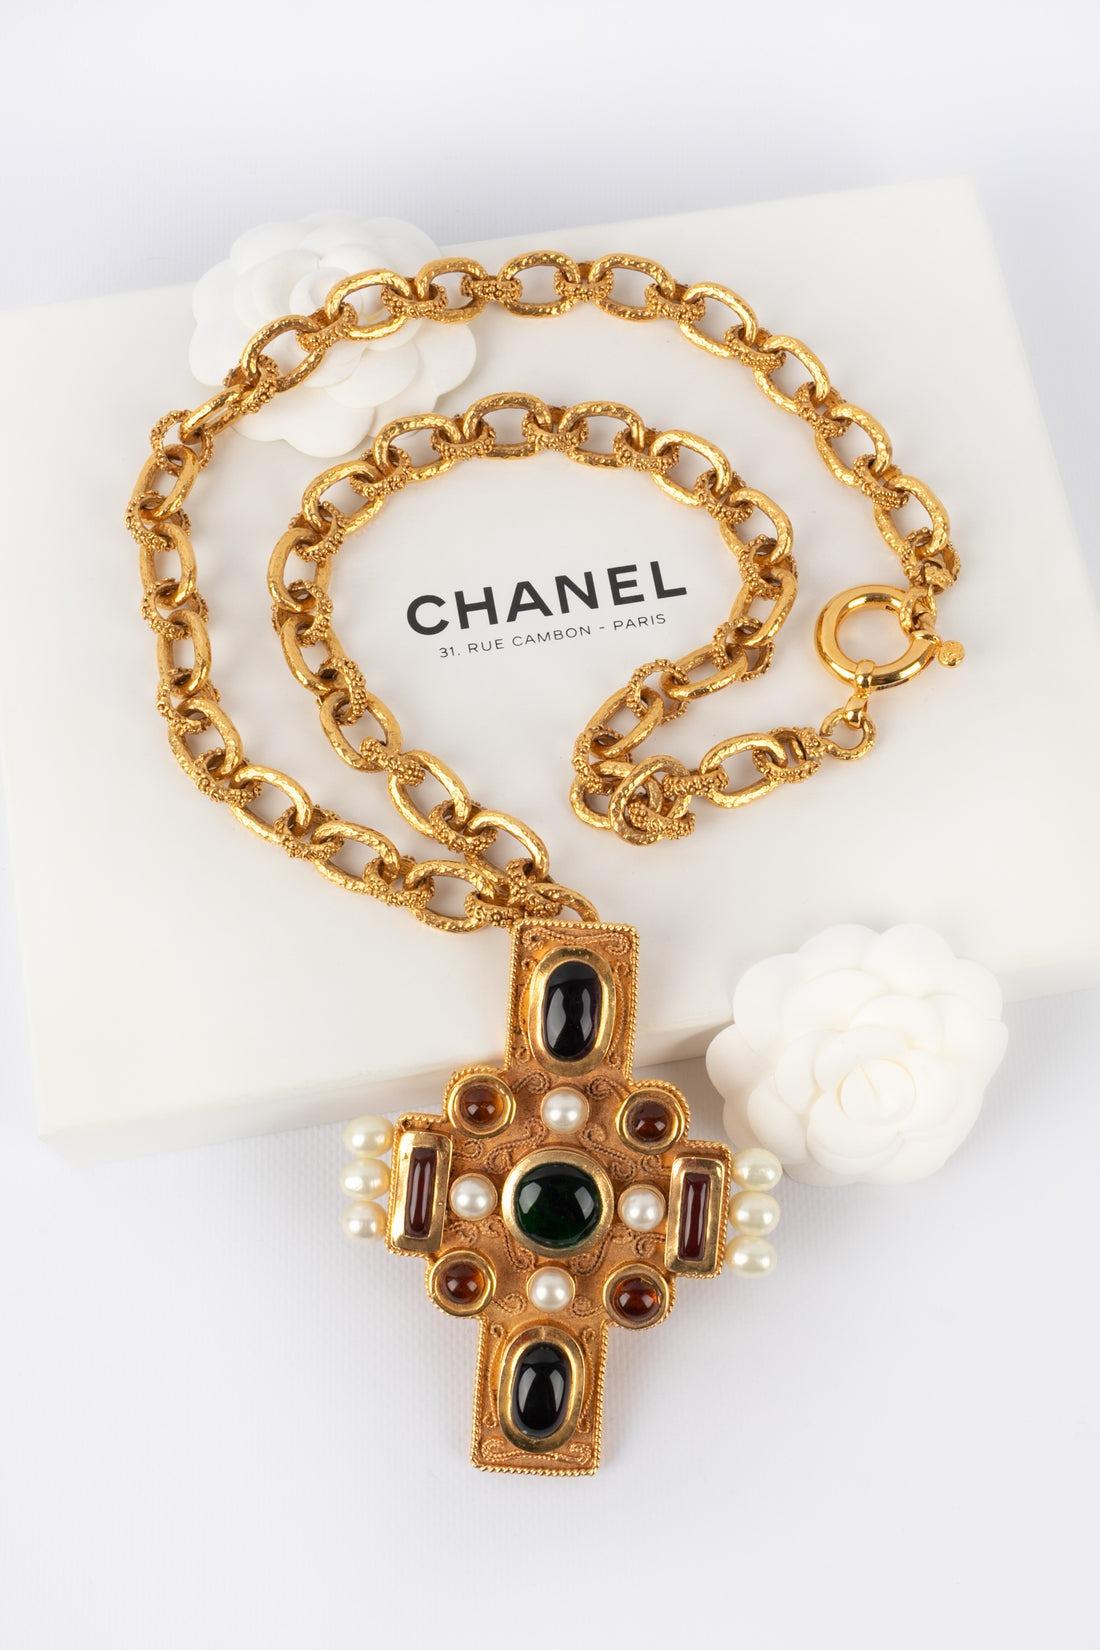 Chanel - (Made in France) Golden metal chain necklace holding a golden metal pendant brooch with glass paste and costume pearls. 2cc5 Collection.

Additional information:
Condition: Very good condition
Dimensions: Length: 88 cm - Height: 12